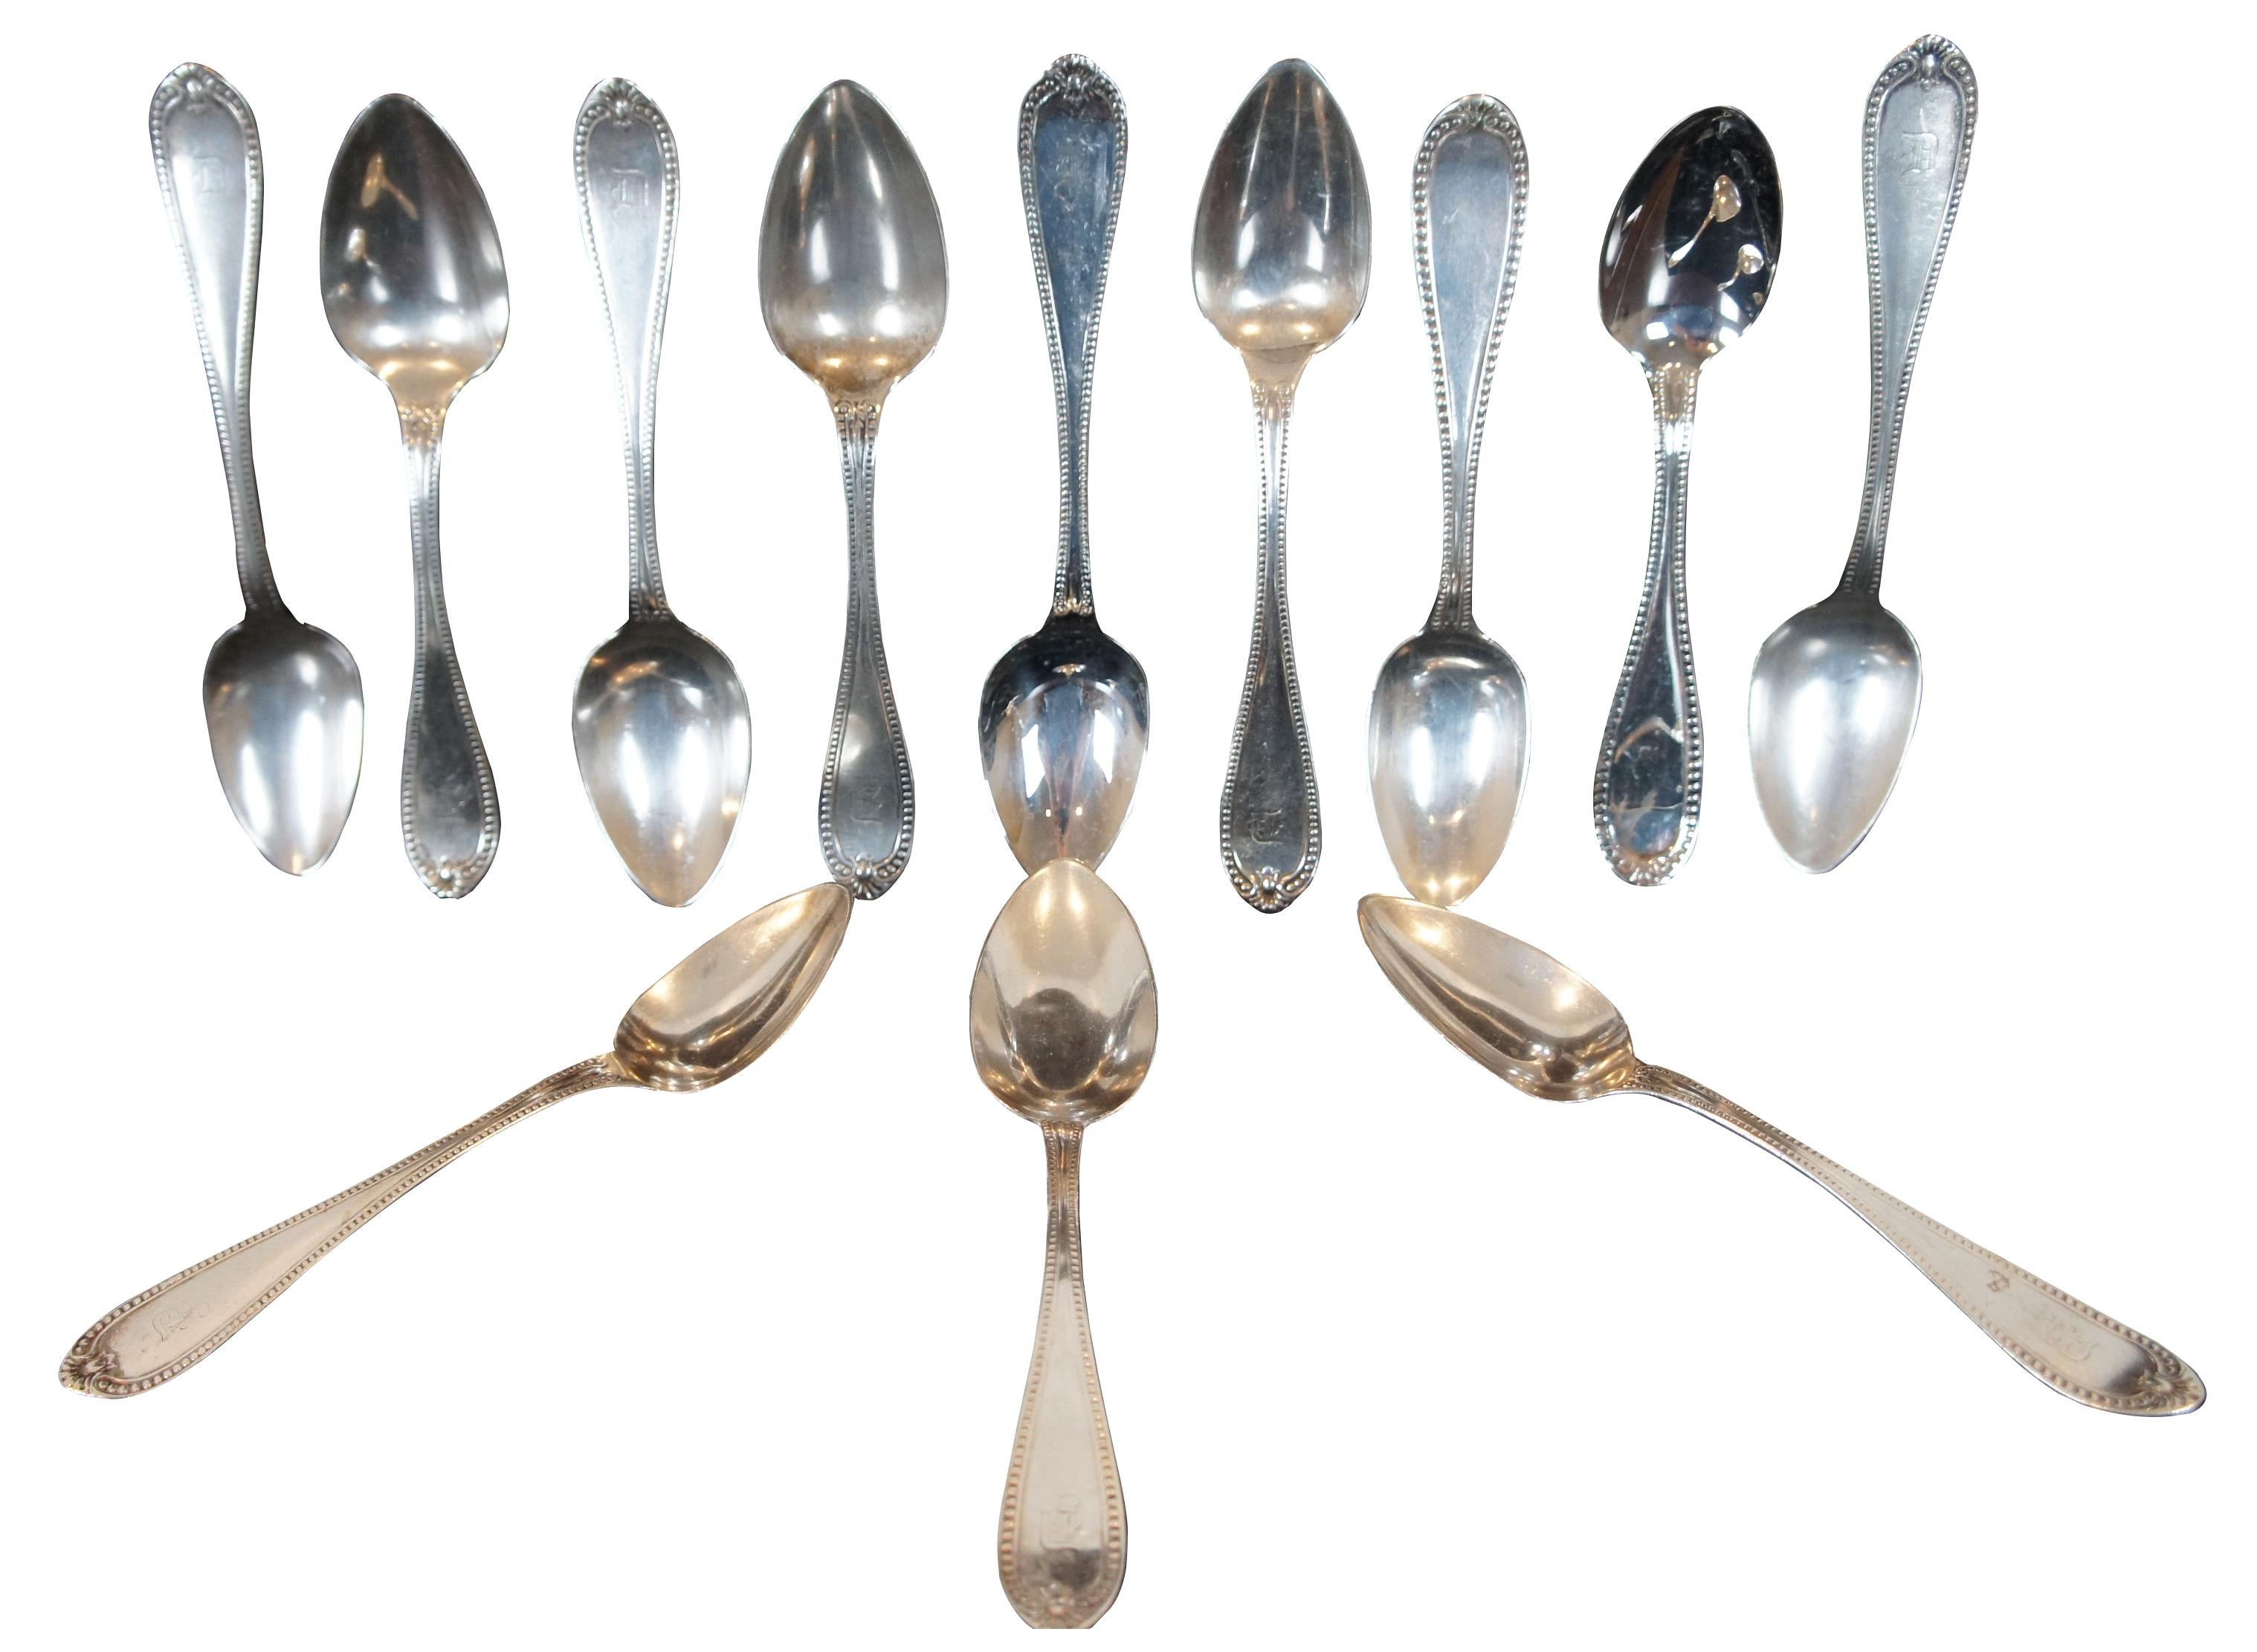 Set of twelve antique sterling silver teaspoons by JE Caldwell and JD Chase with matching beaded edge pattern and monogrammed with a D.
284.9 g.